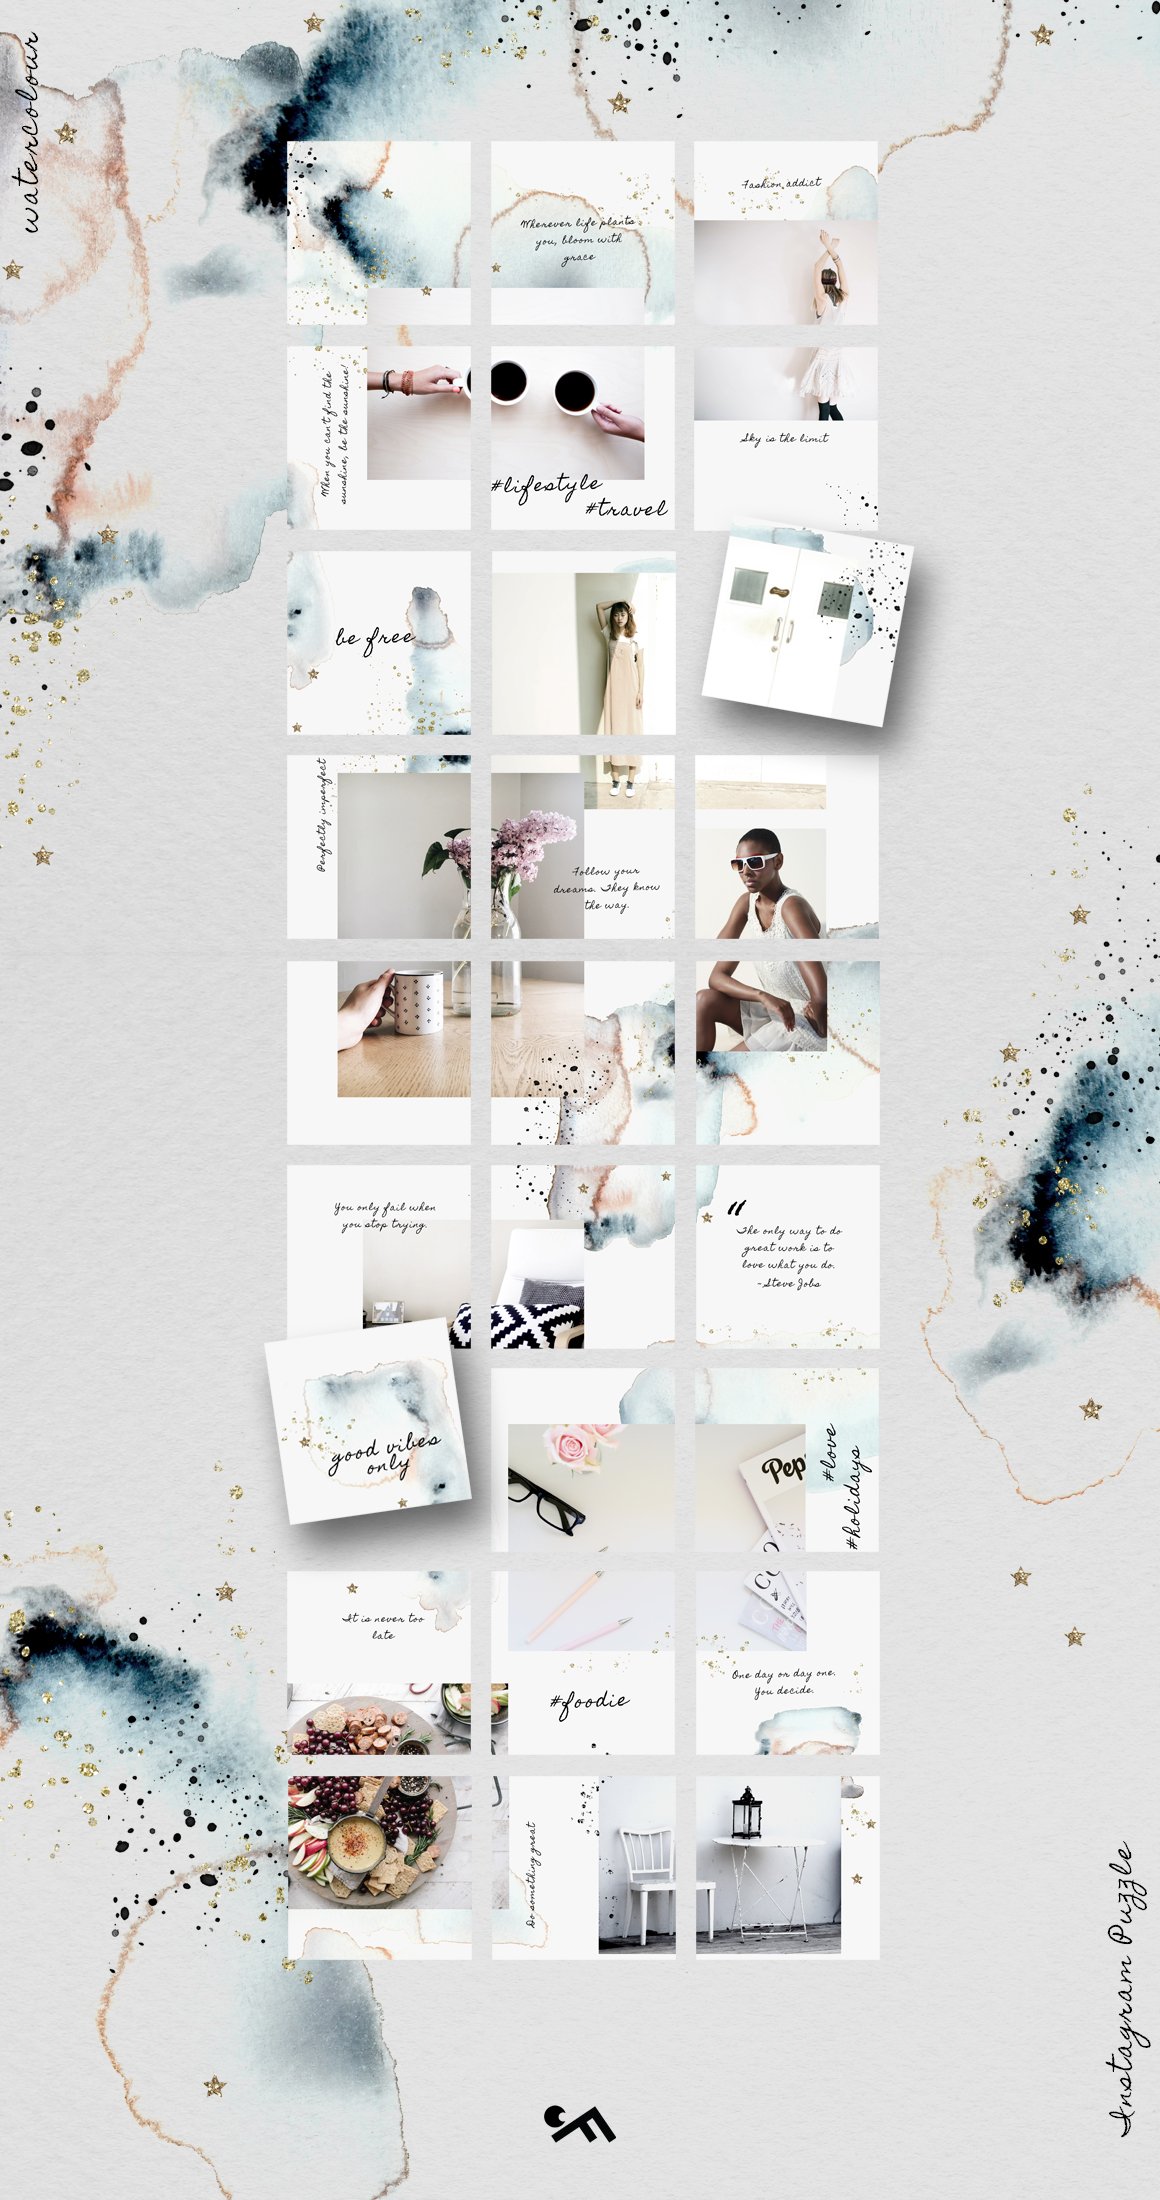 Instagram template with glitter elements.